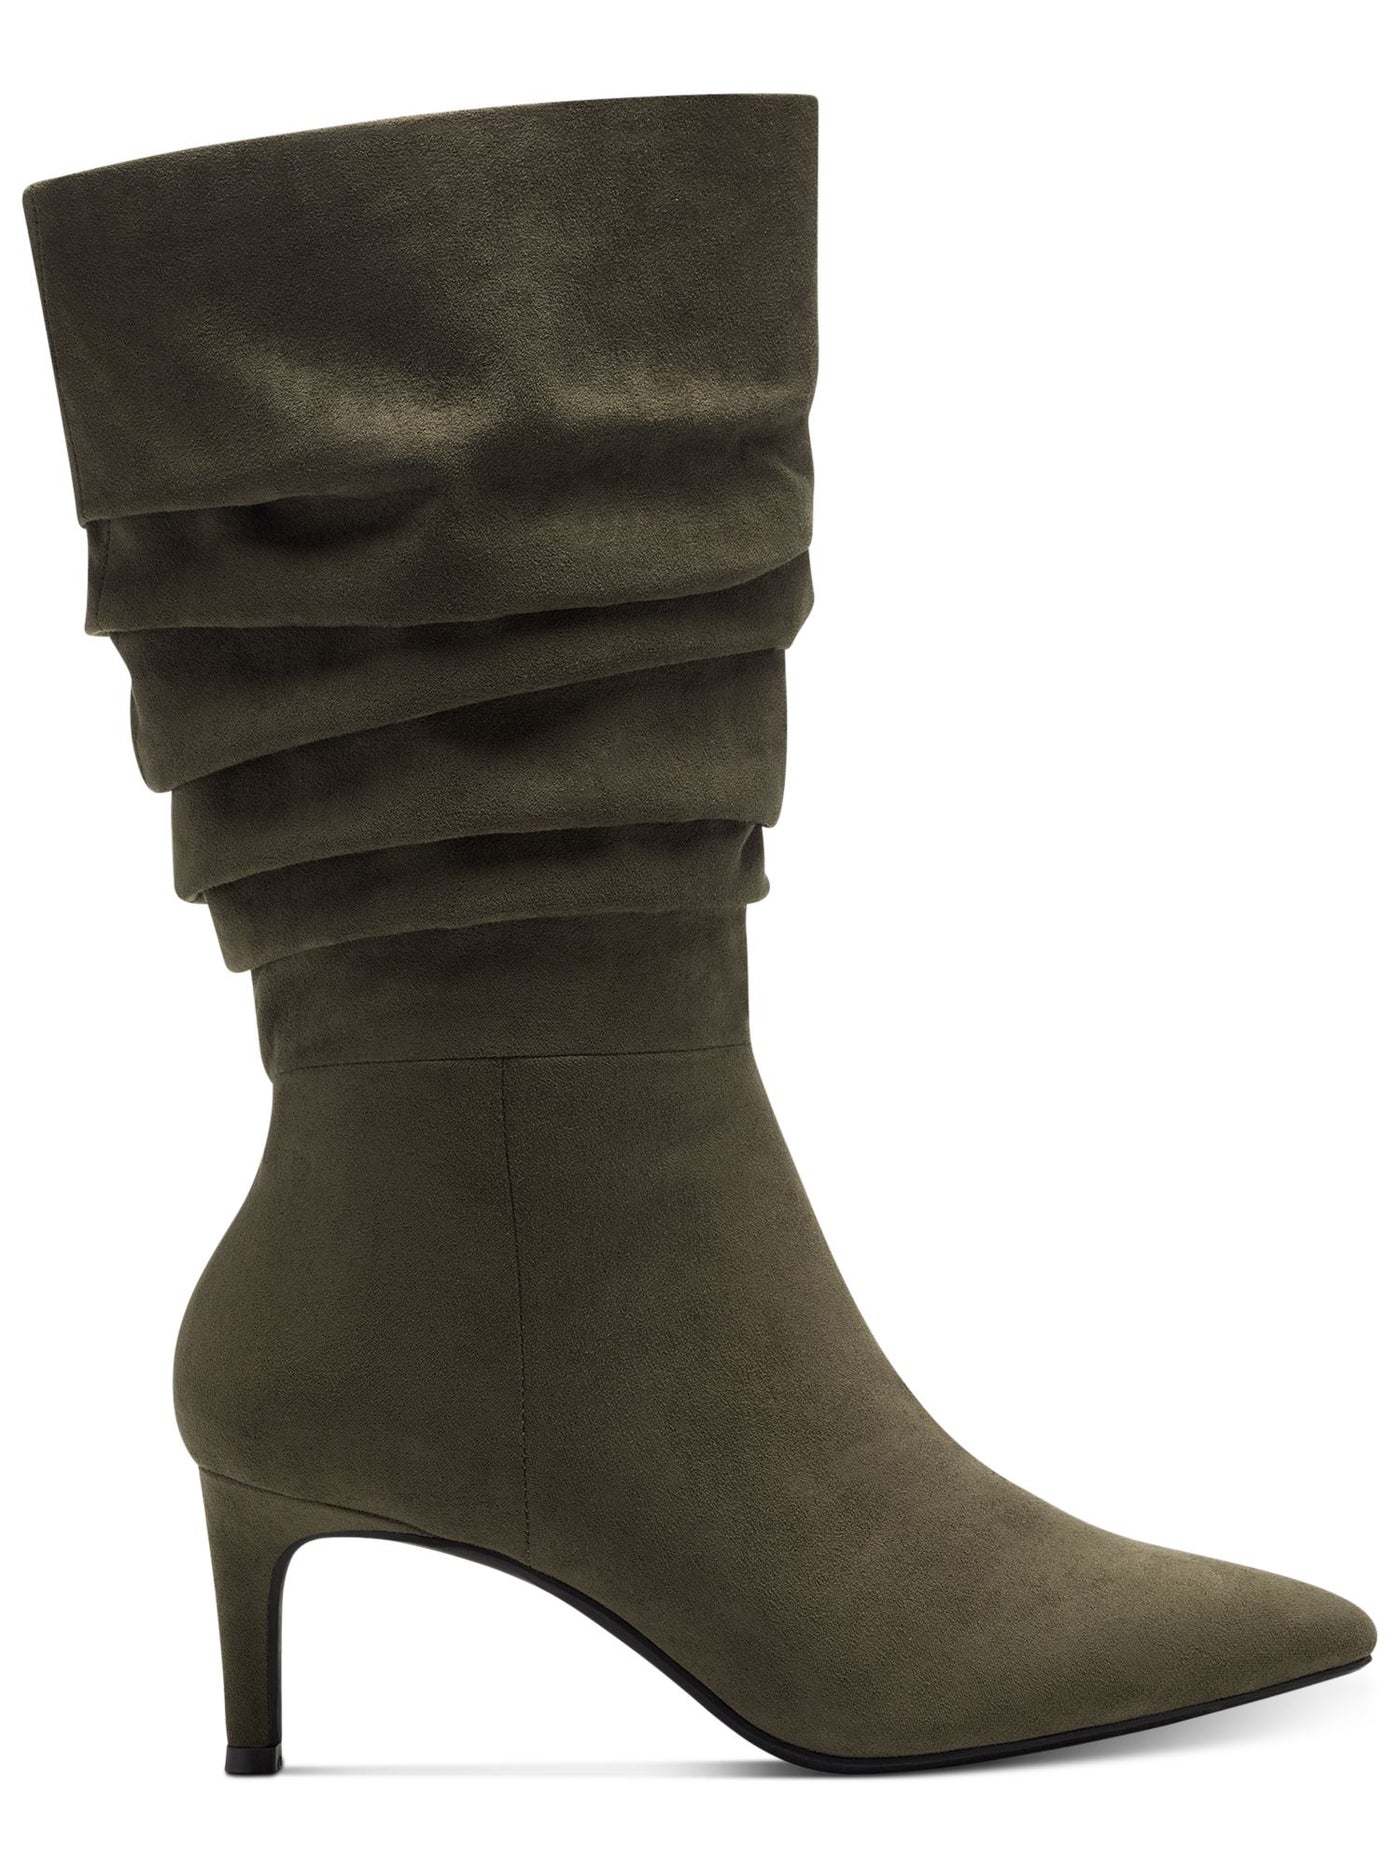 ALFANI Womens Olive Green Padded Lissa Pointed Toe Stiletto Zip-Up Slouch Boot 8.5 M